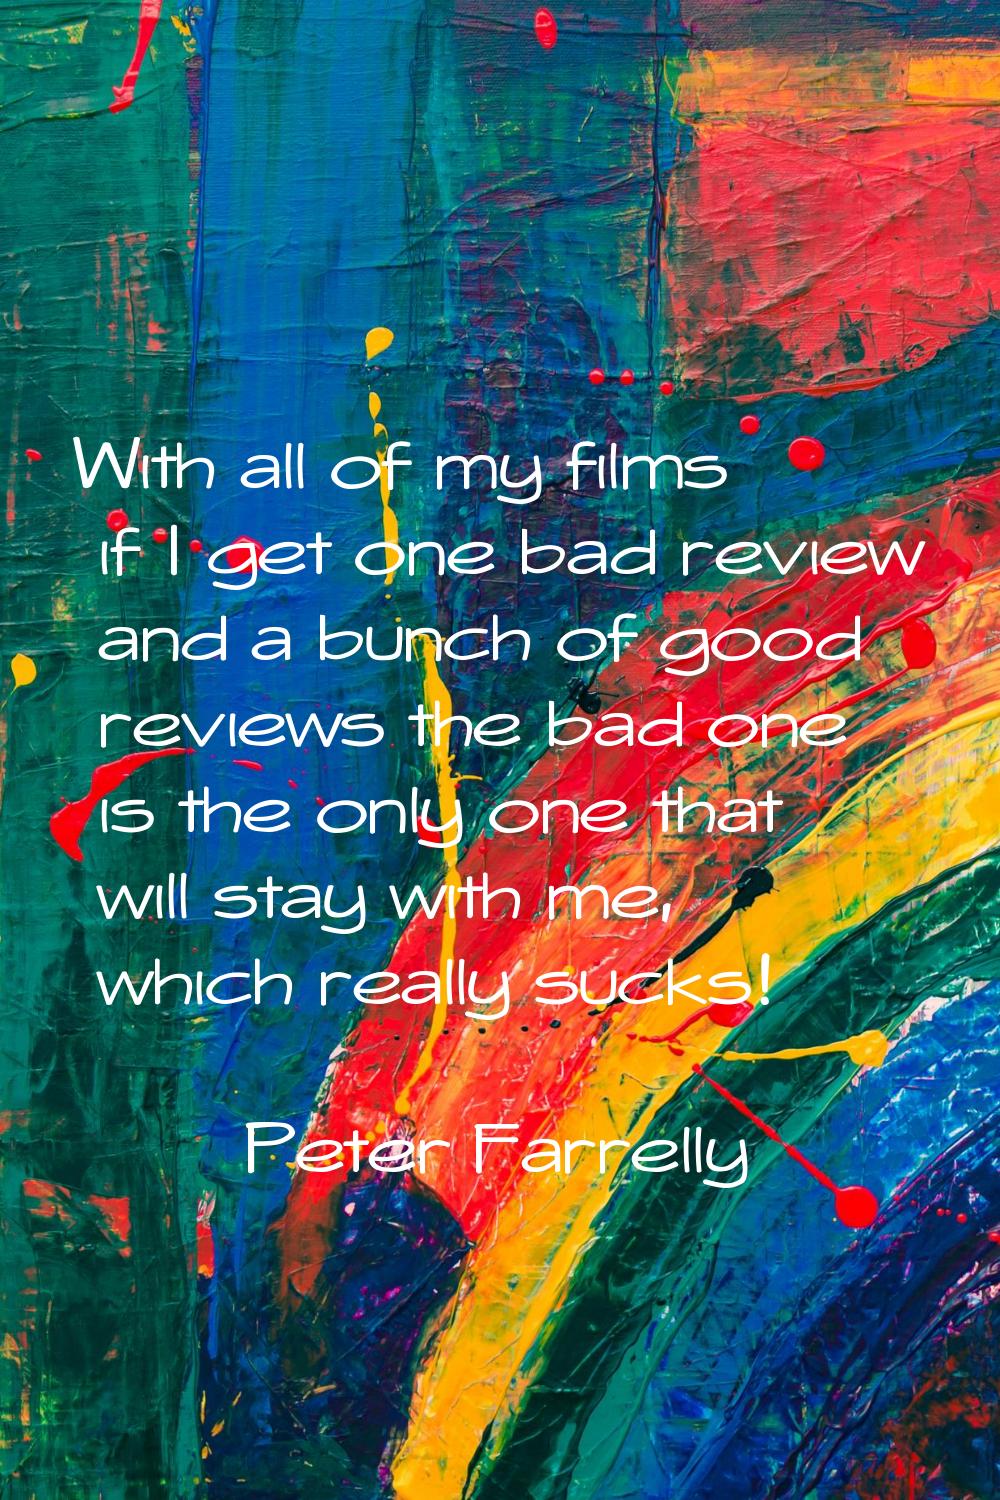 With all of my films if I get one bad review and a bunch of good reviews the bad one is the only on